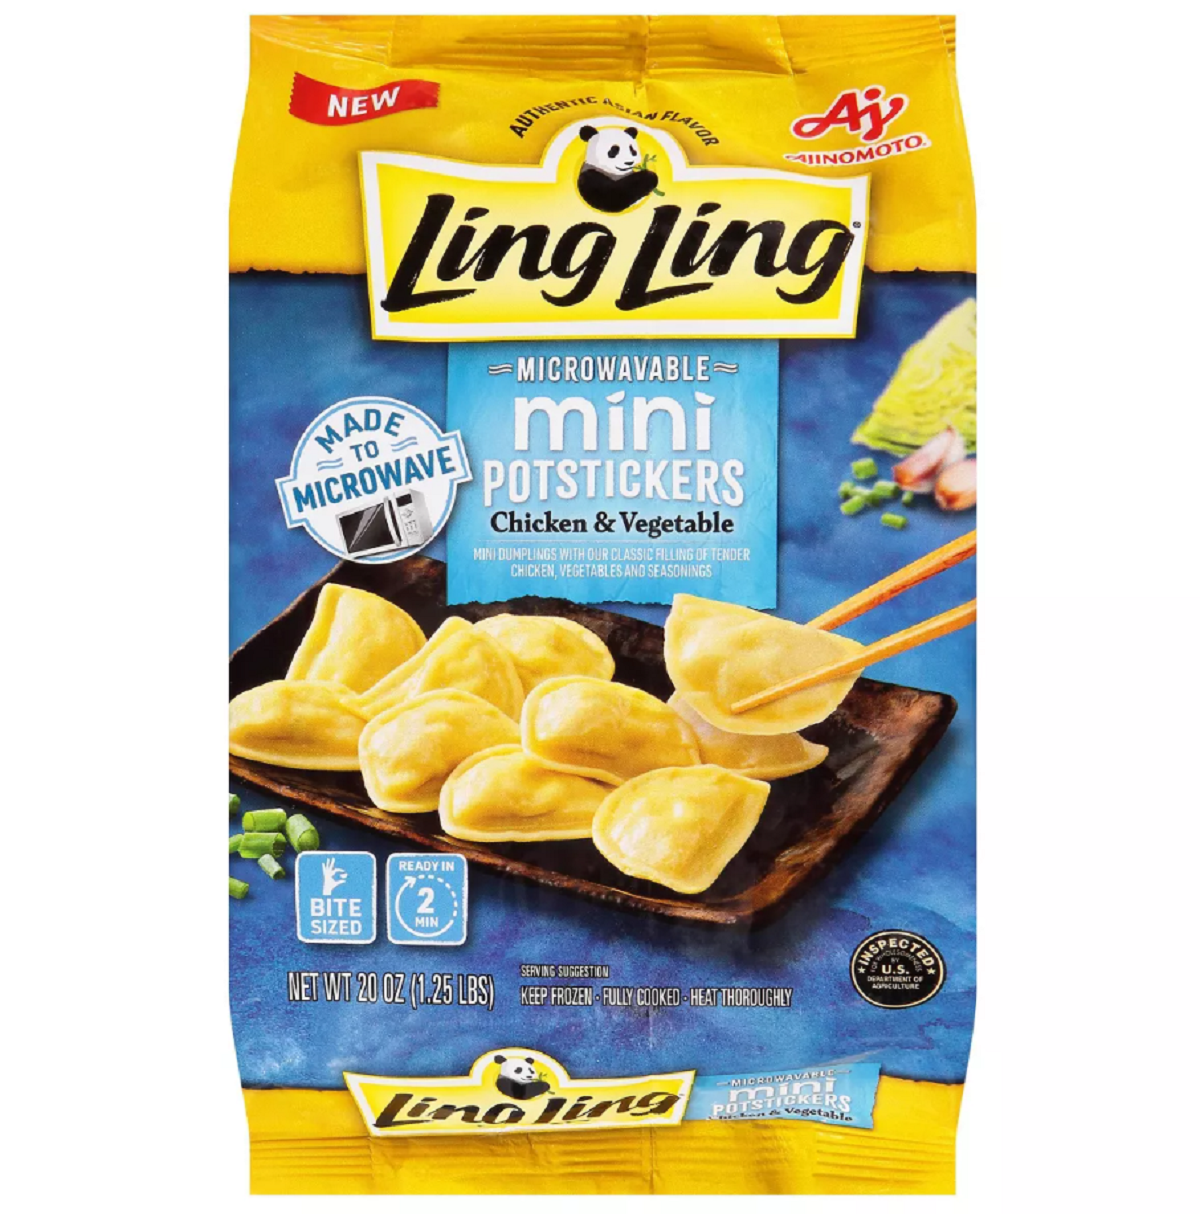 Ling Ling Frozen Mini Potstickers - Chicken and Vegetable, Ling Ling Potstickers printable coupon